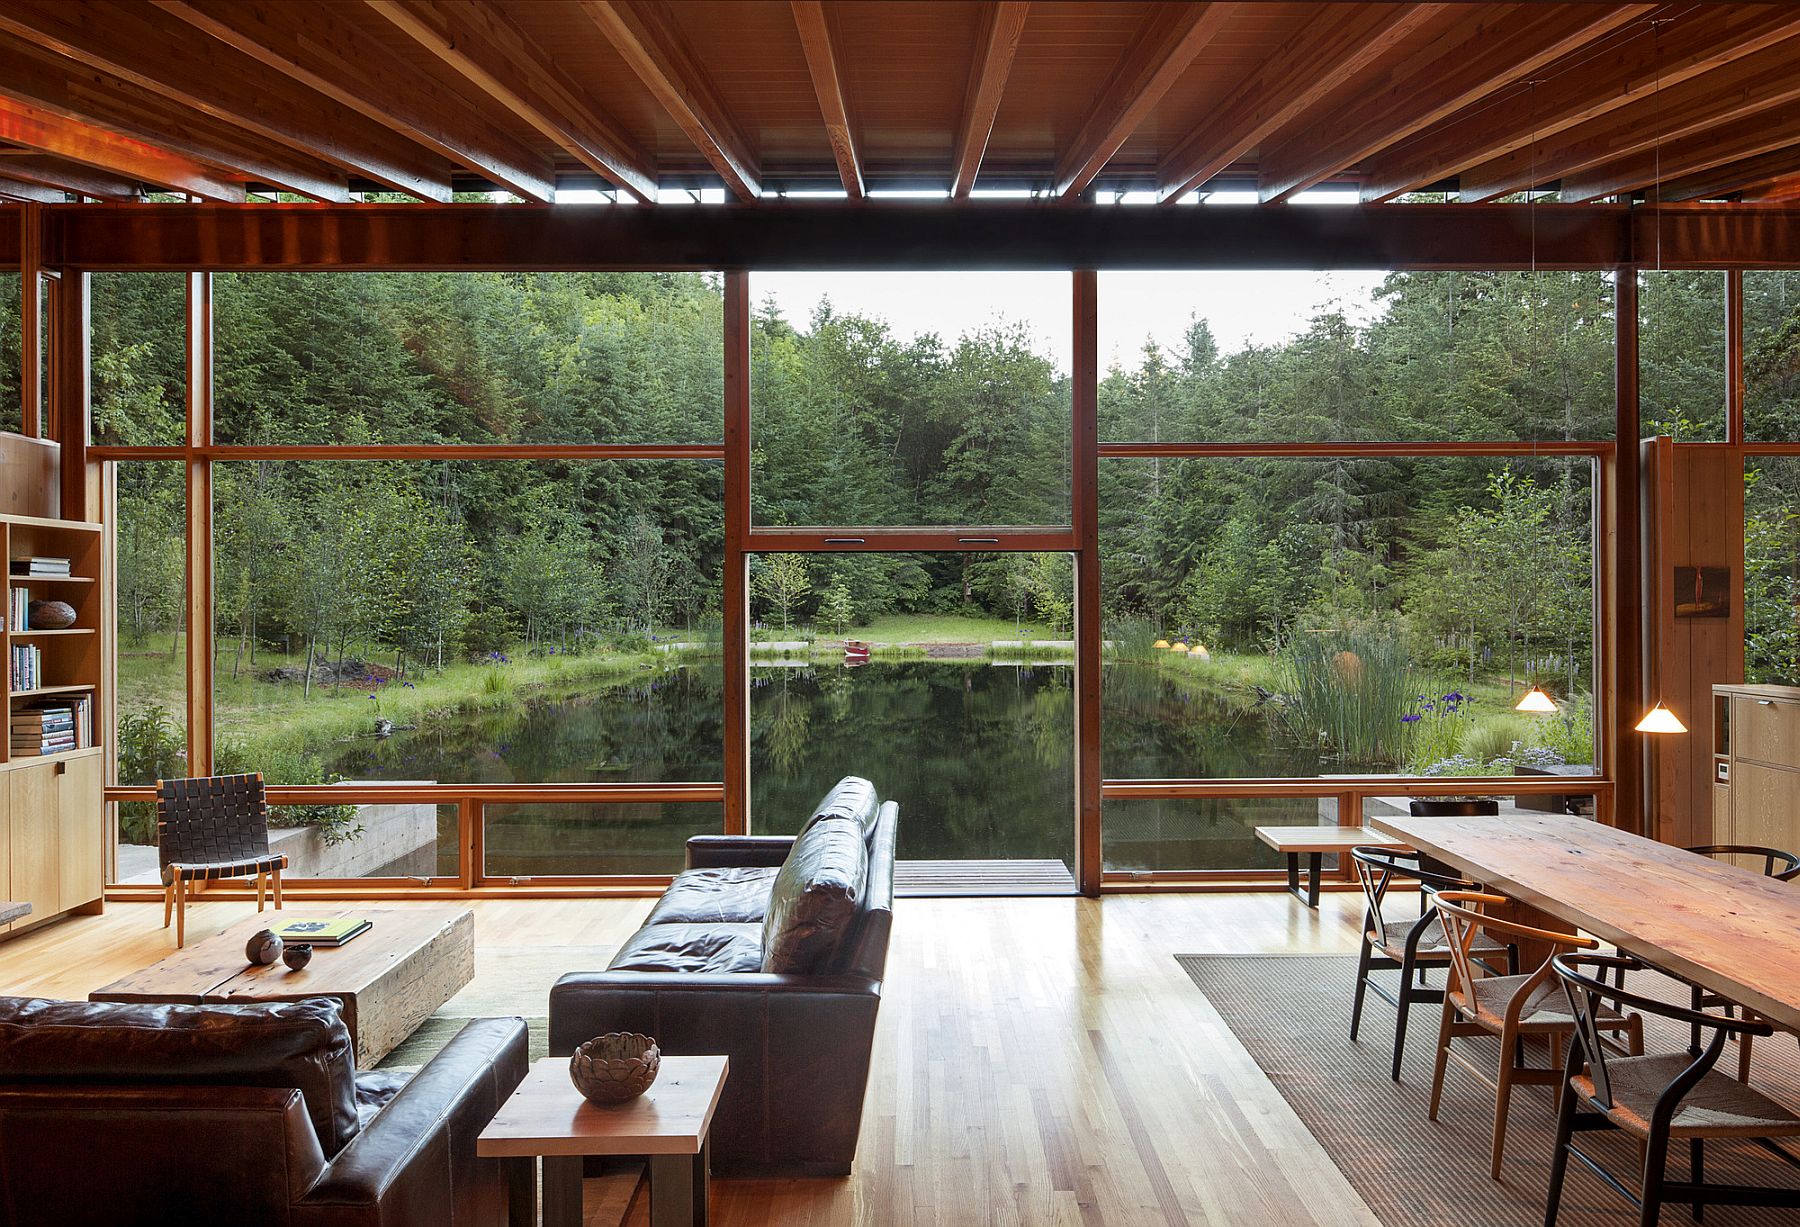 Living room flows into the overgrown landscape and the manmade pond